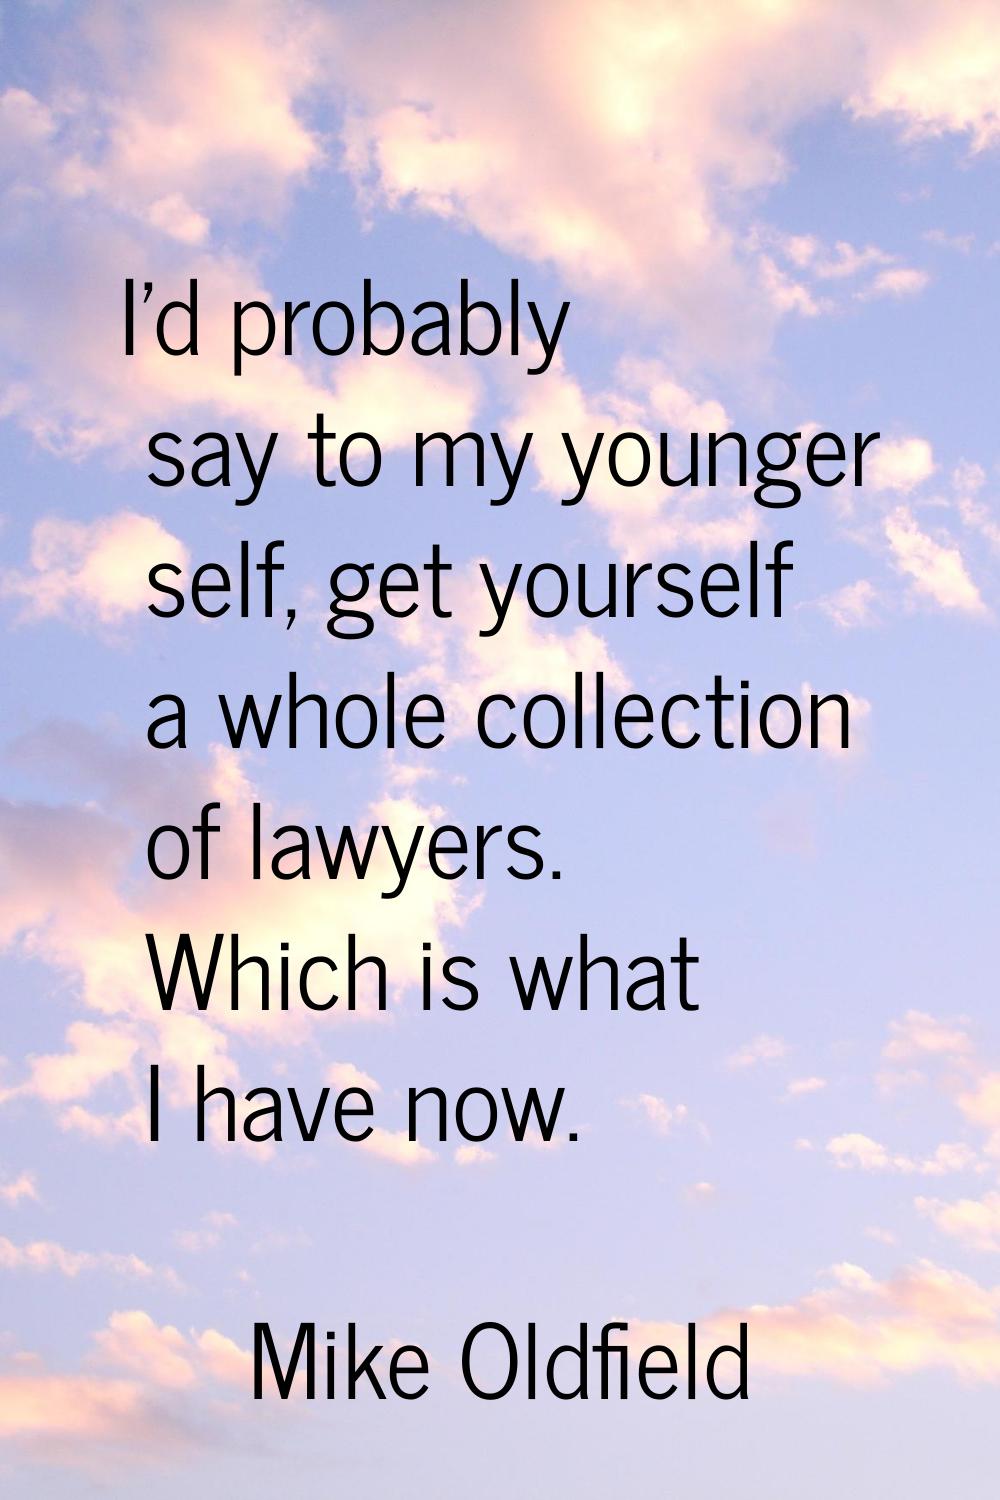 I'd probably say to my younger self, get yourself a whole collection of lawyers. Which is what I ha